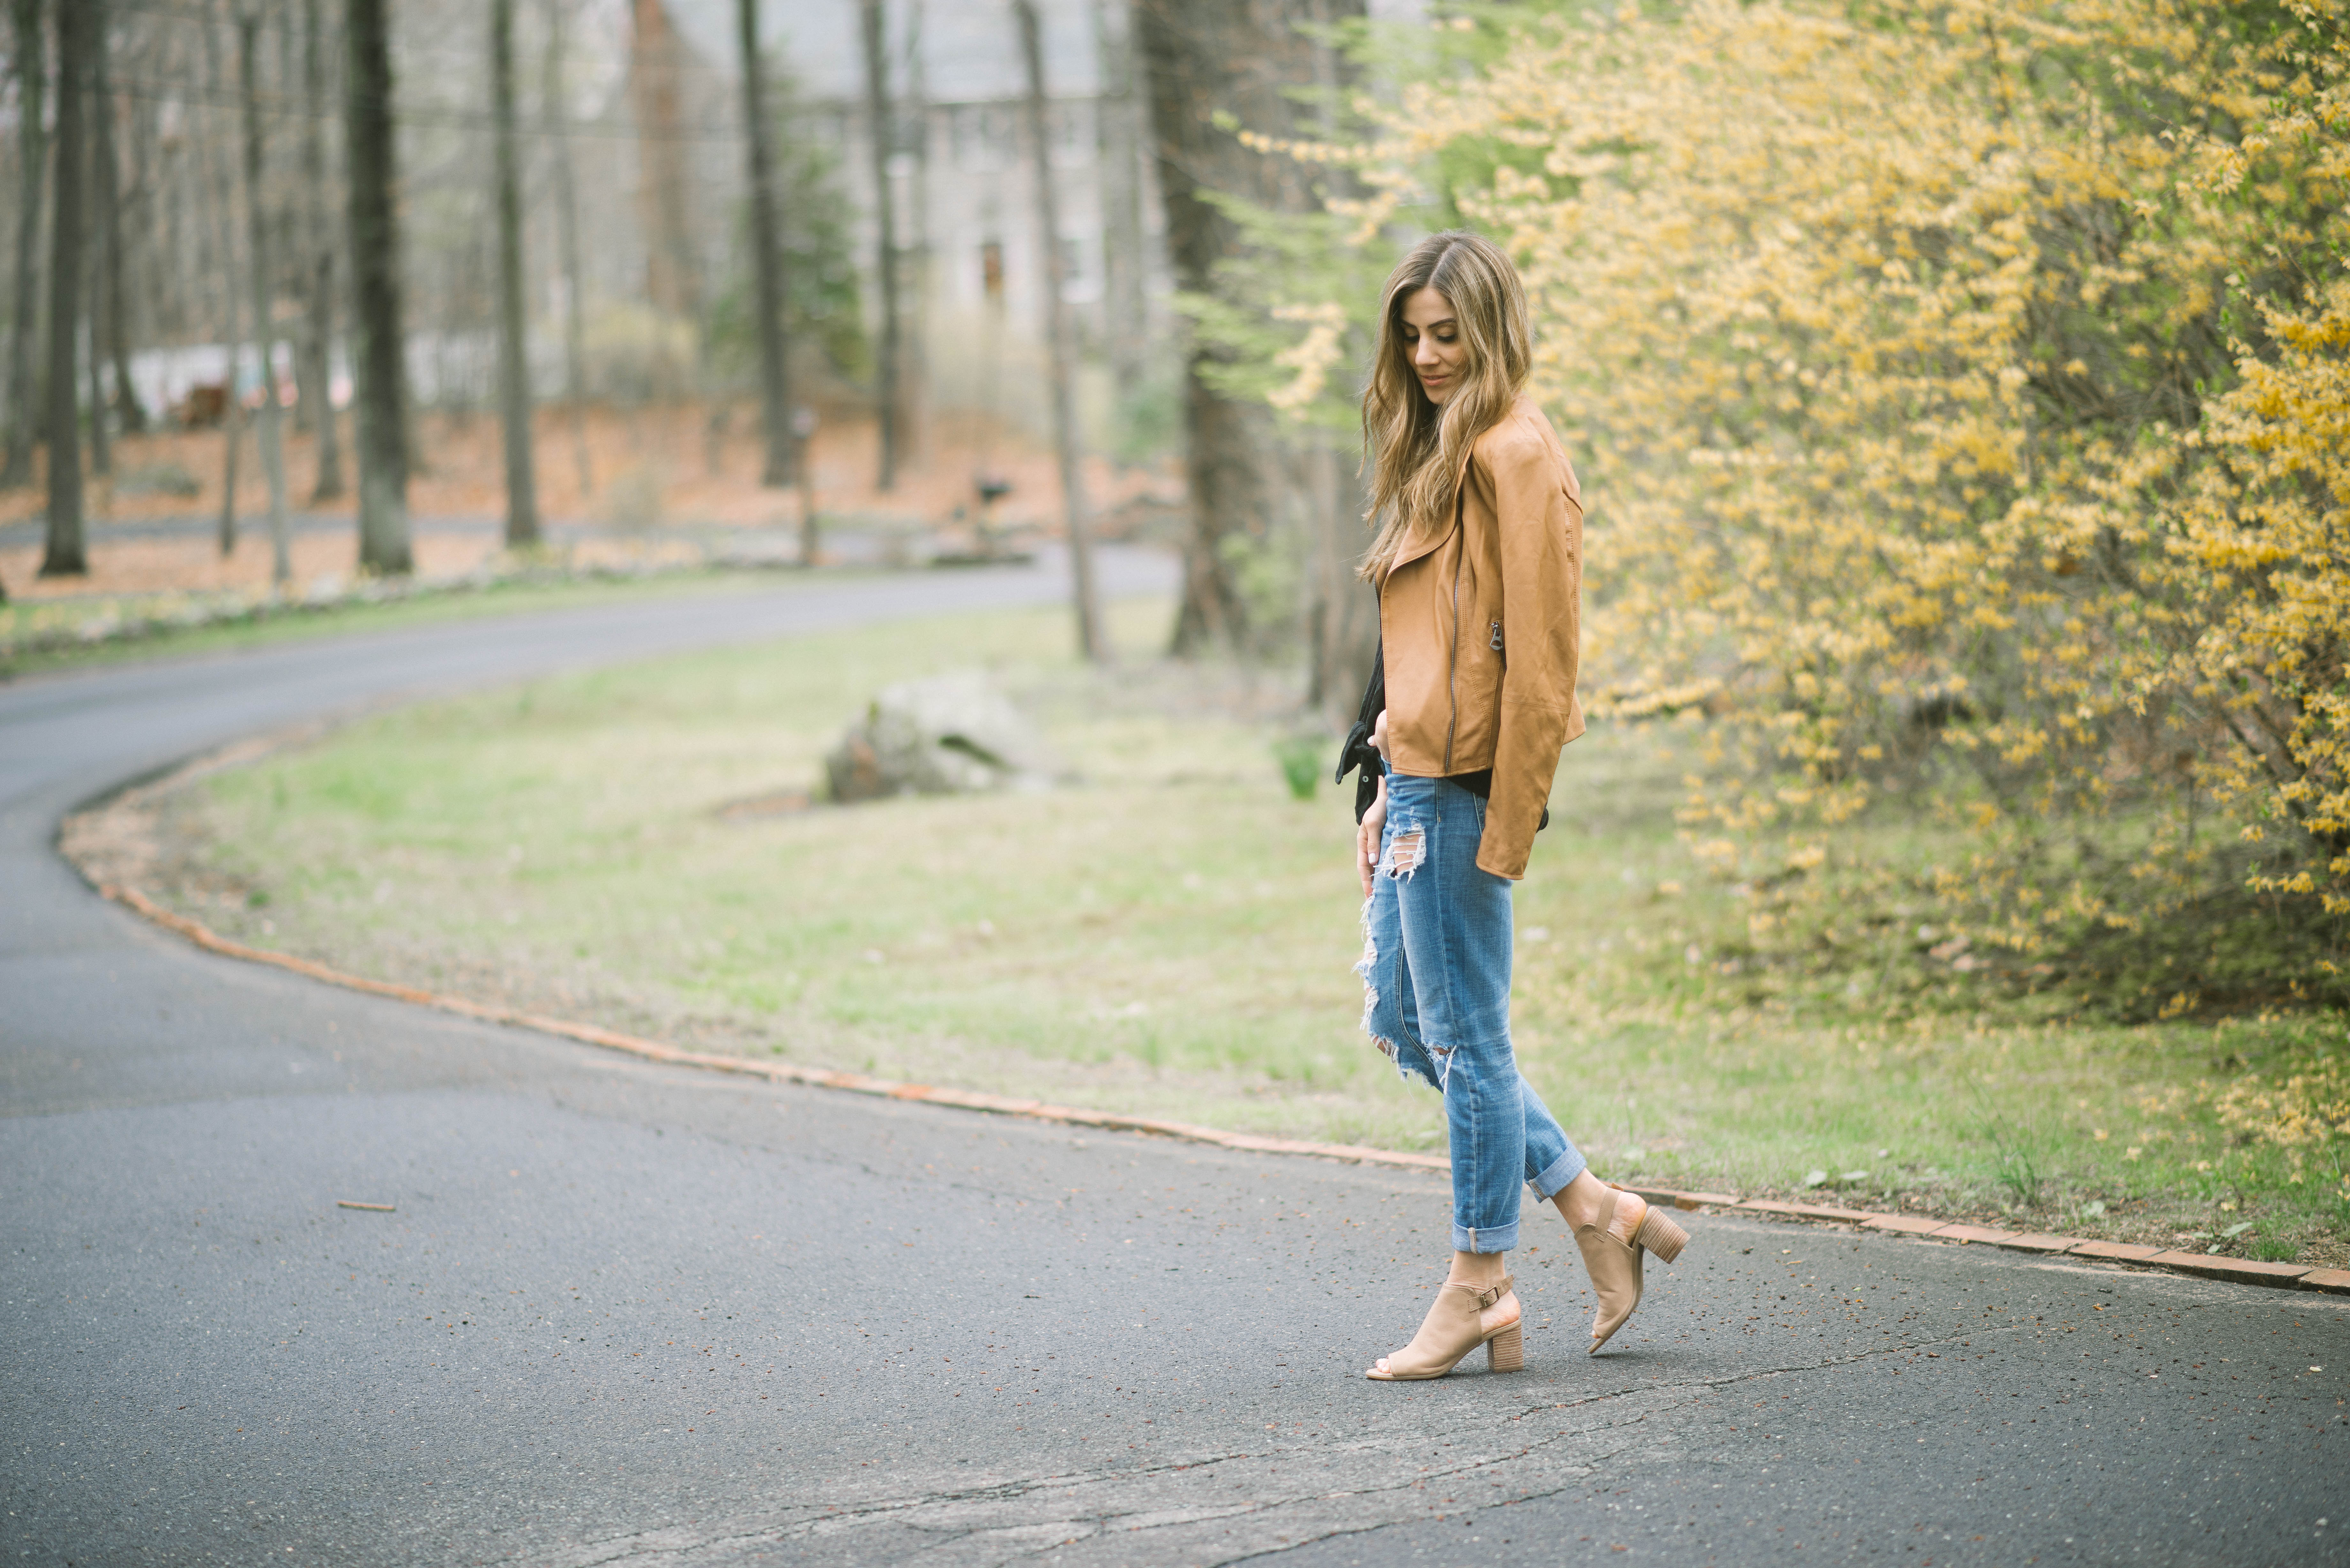 Simple tips for How To Style Boyfriend Jeans for any body type, including the best shoes to wear them with to accentuate your frame!